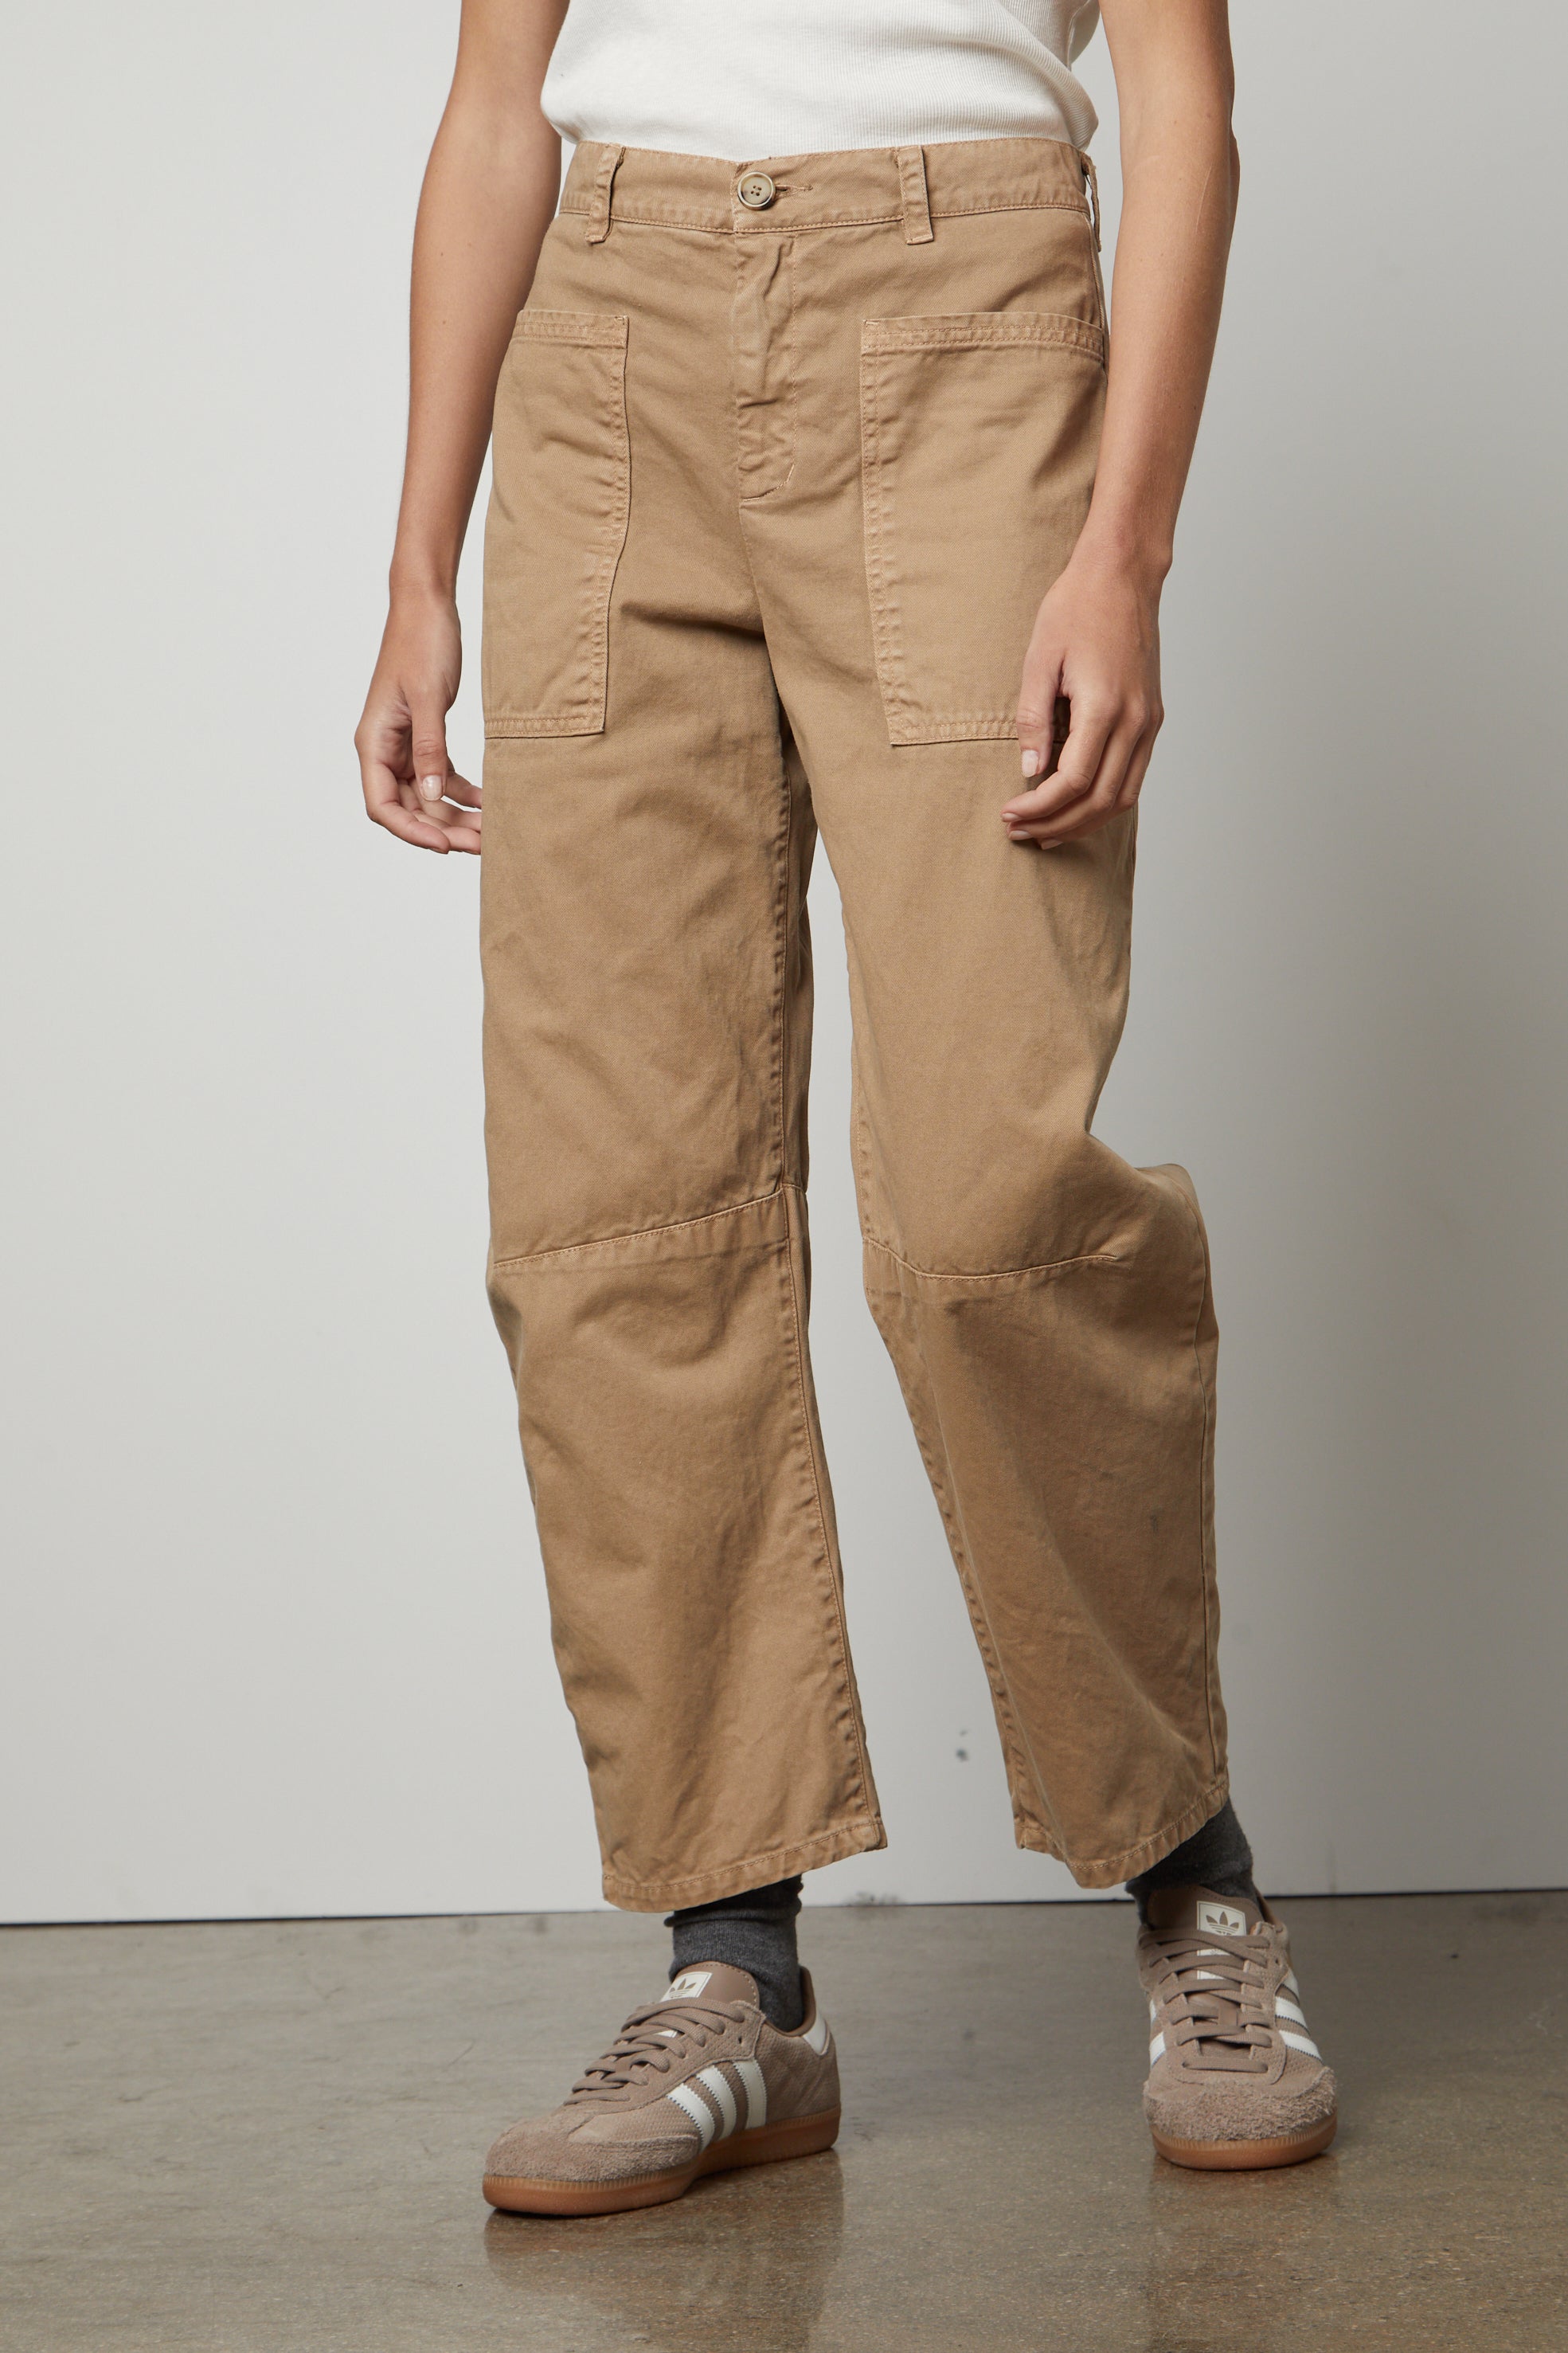   A woman wearing the Velvet by Graham & Spencer BRYLIE SANDED TWILL UTILITY PANT and white t-shirt. 